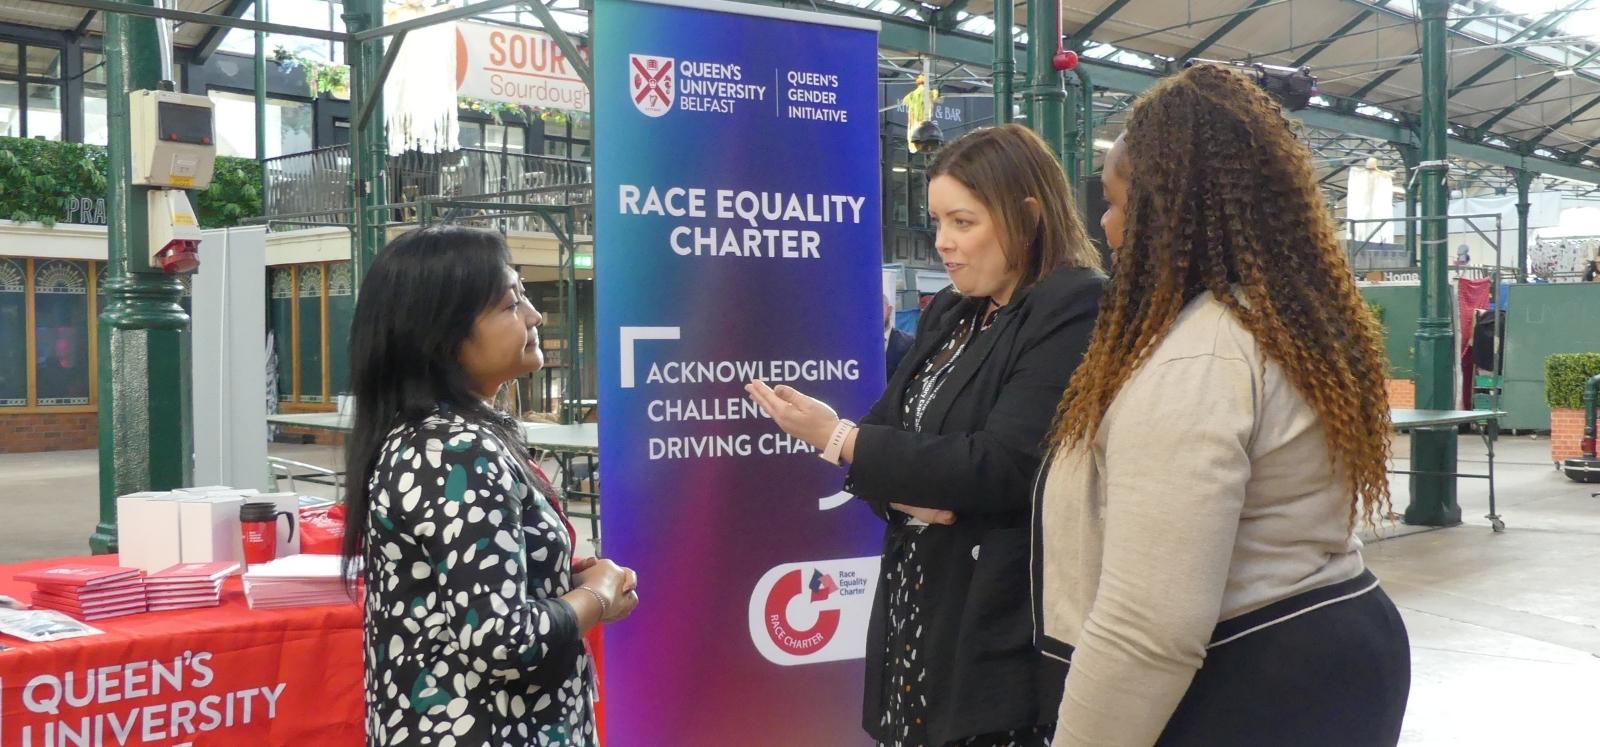 Adone Tielenius Kruythoff-Mohd Sarip talking with Minister Deirdre Hargey at the Black History Month expo, St George's Market